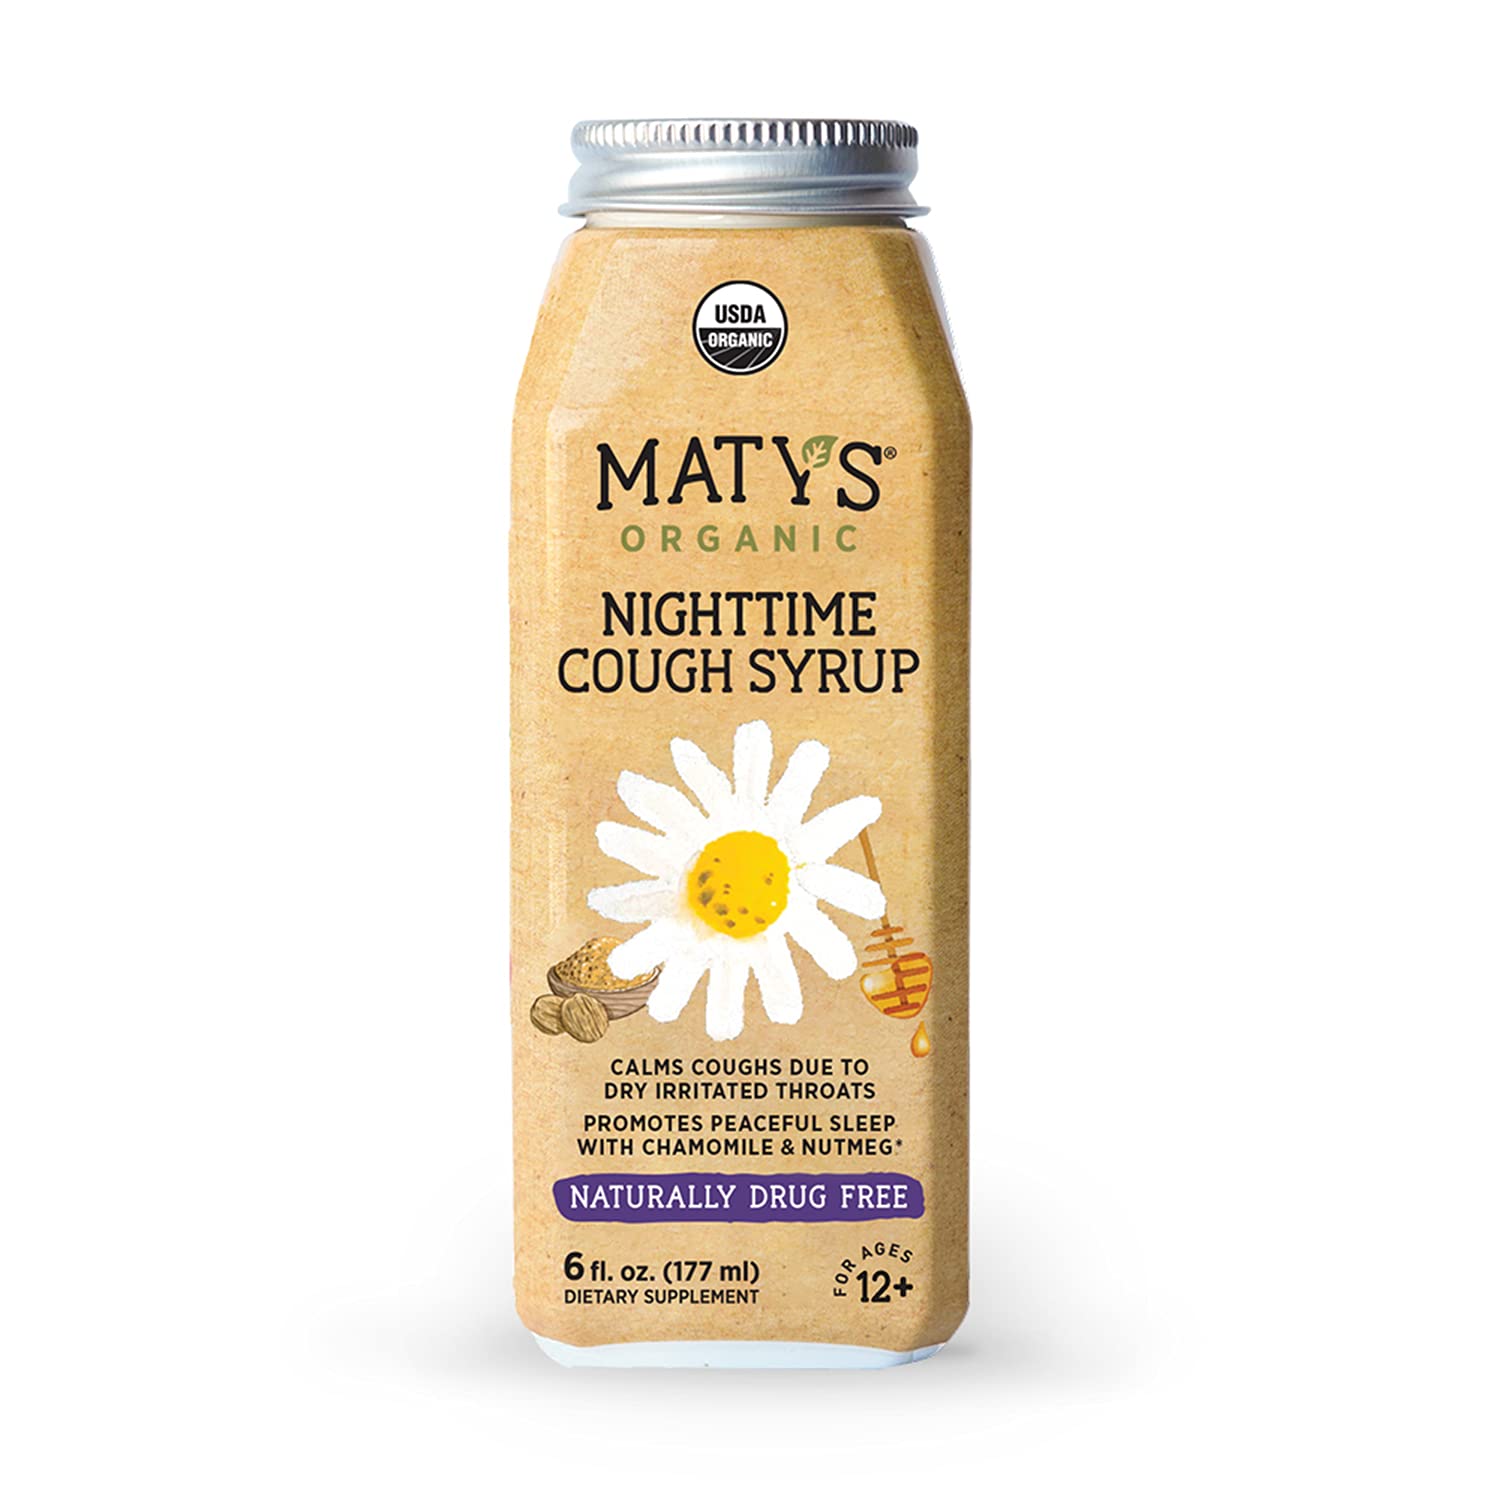 Maty'S All Natural Cough Syrup Reviews